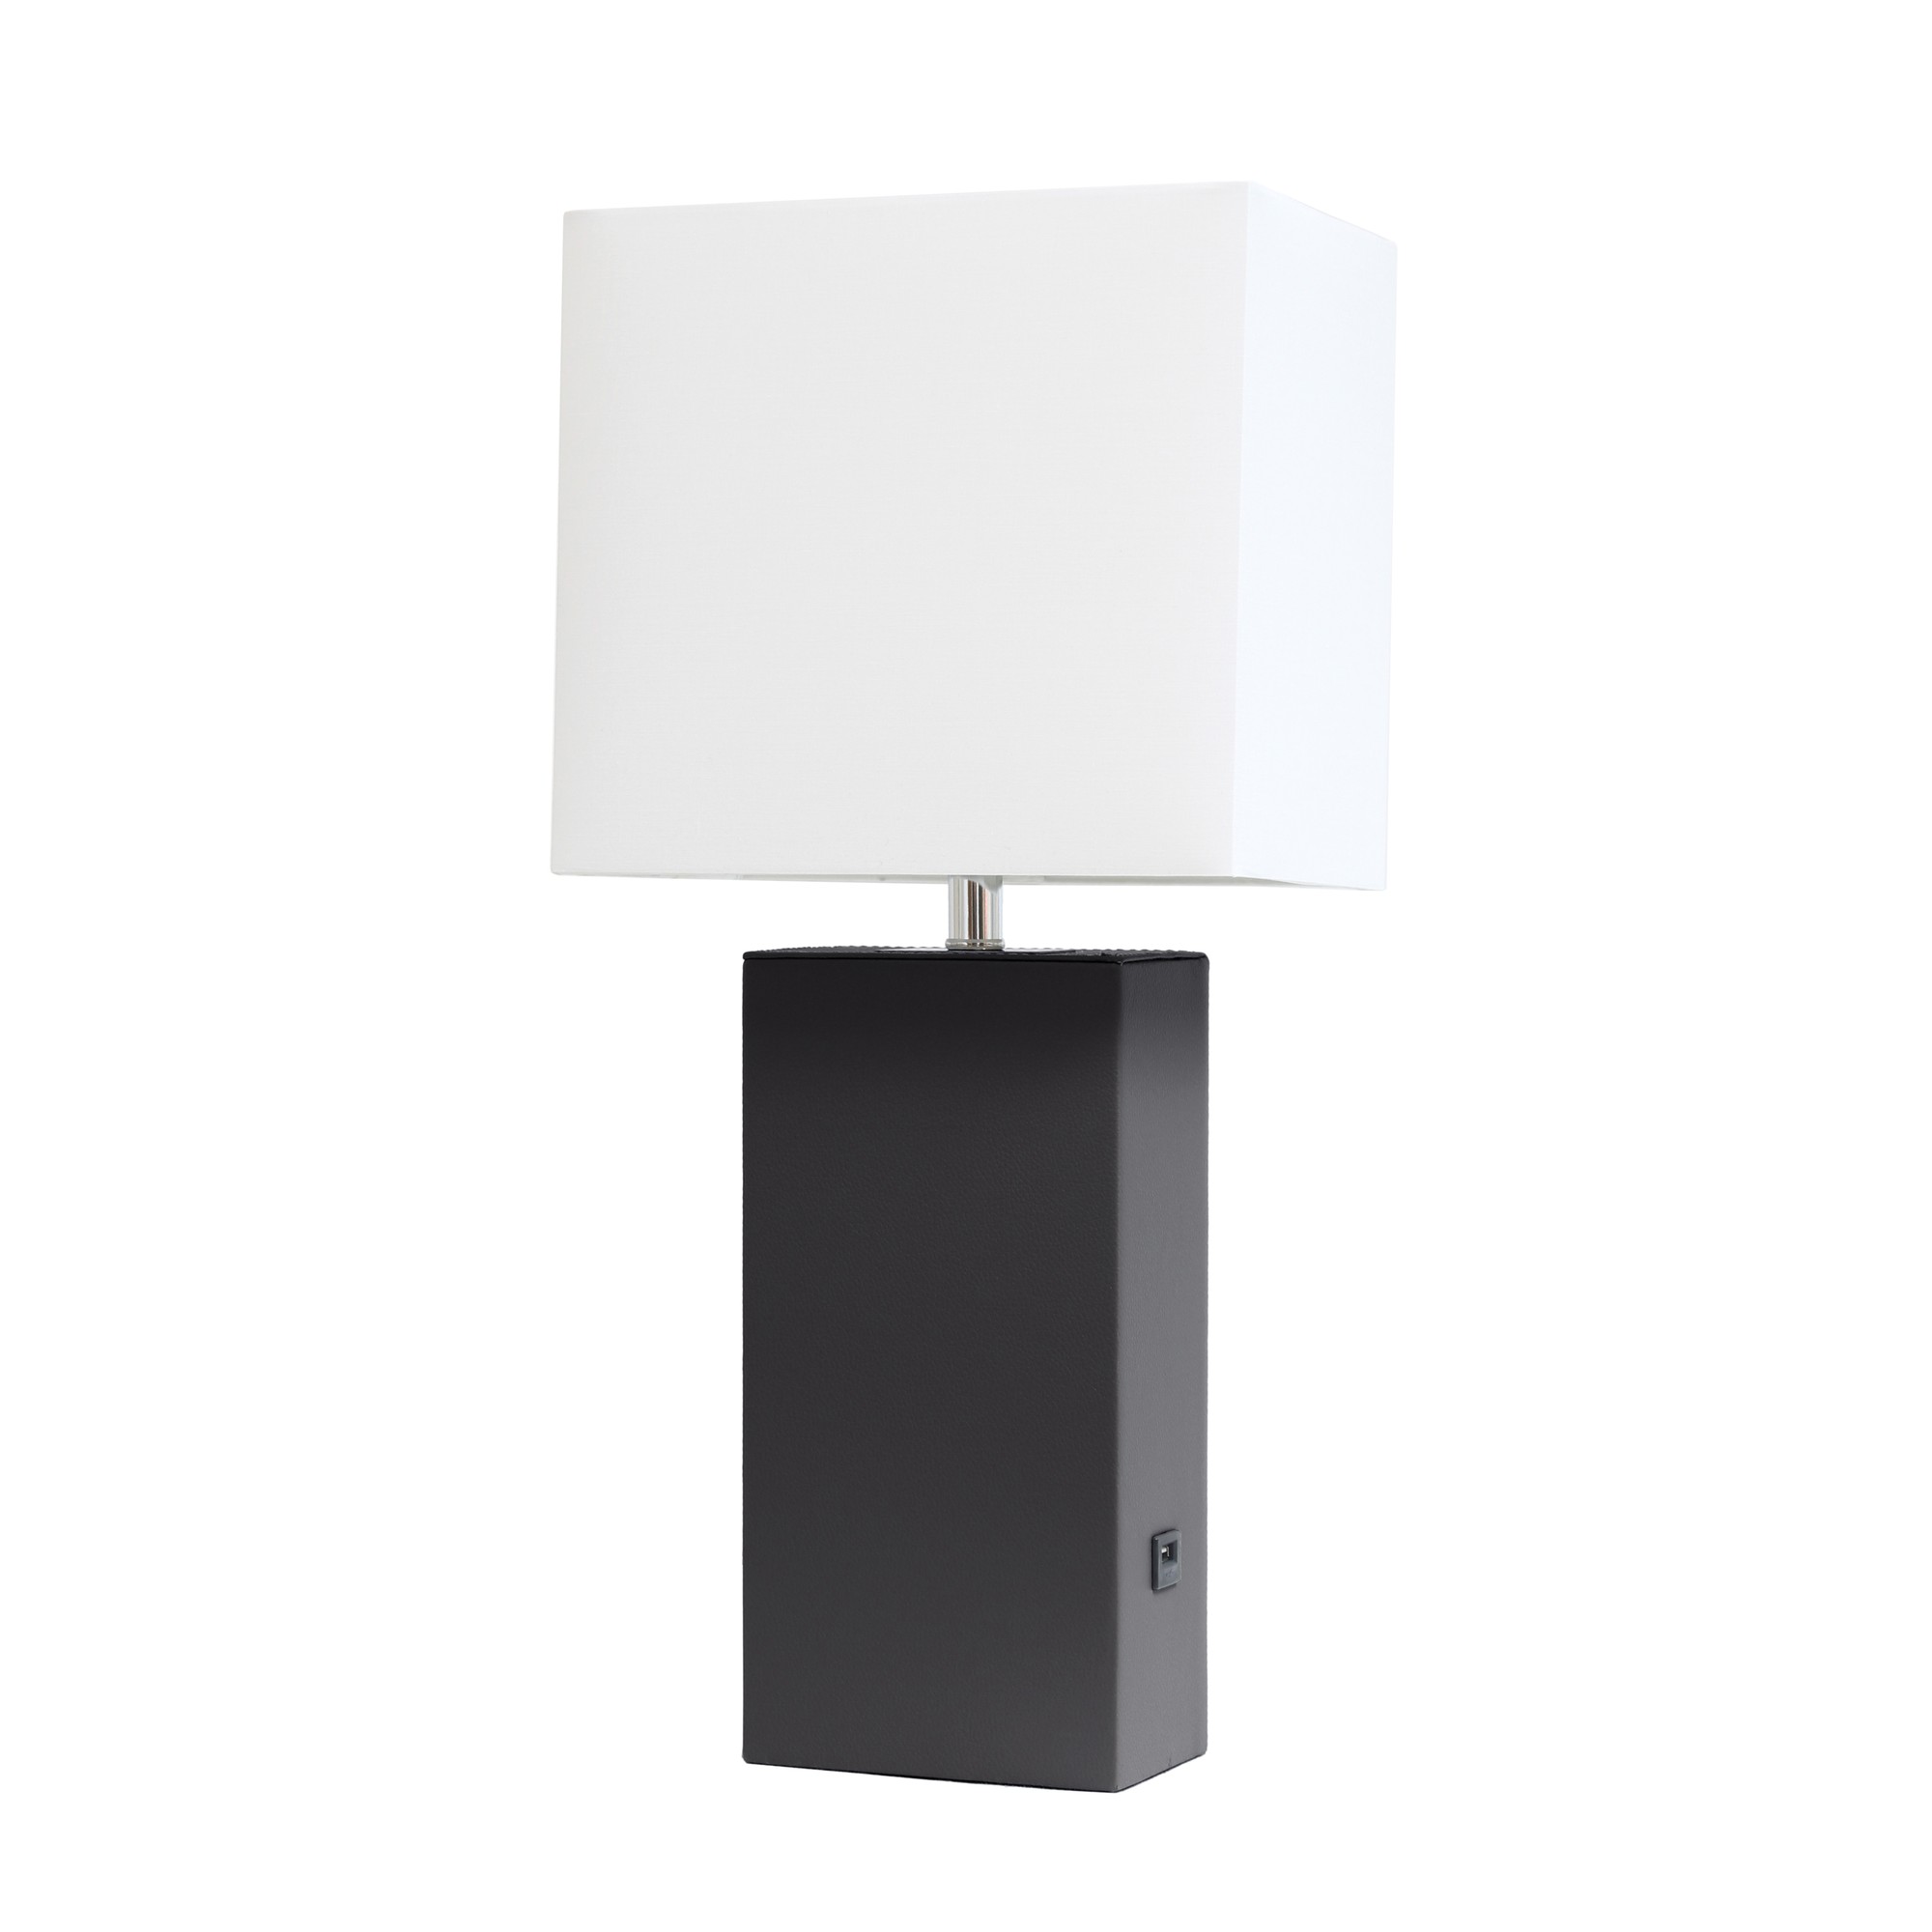 21in Table Lamp USB Charg Port White Shade Black